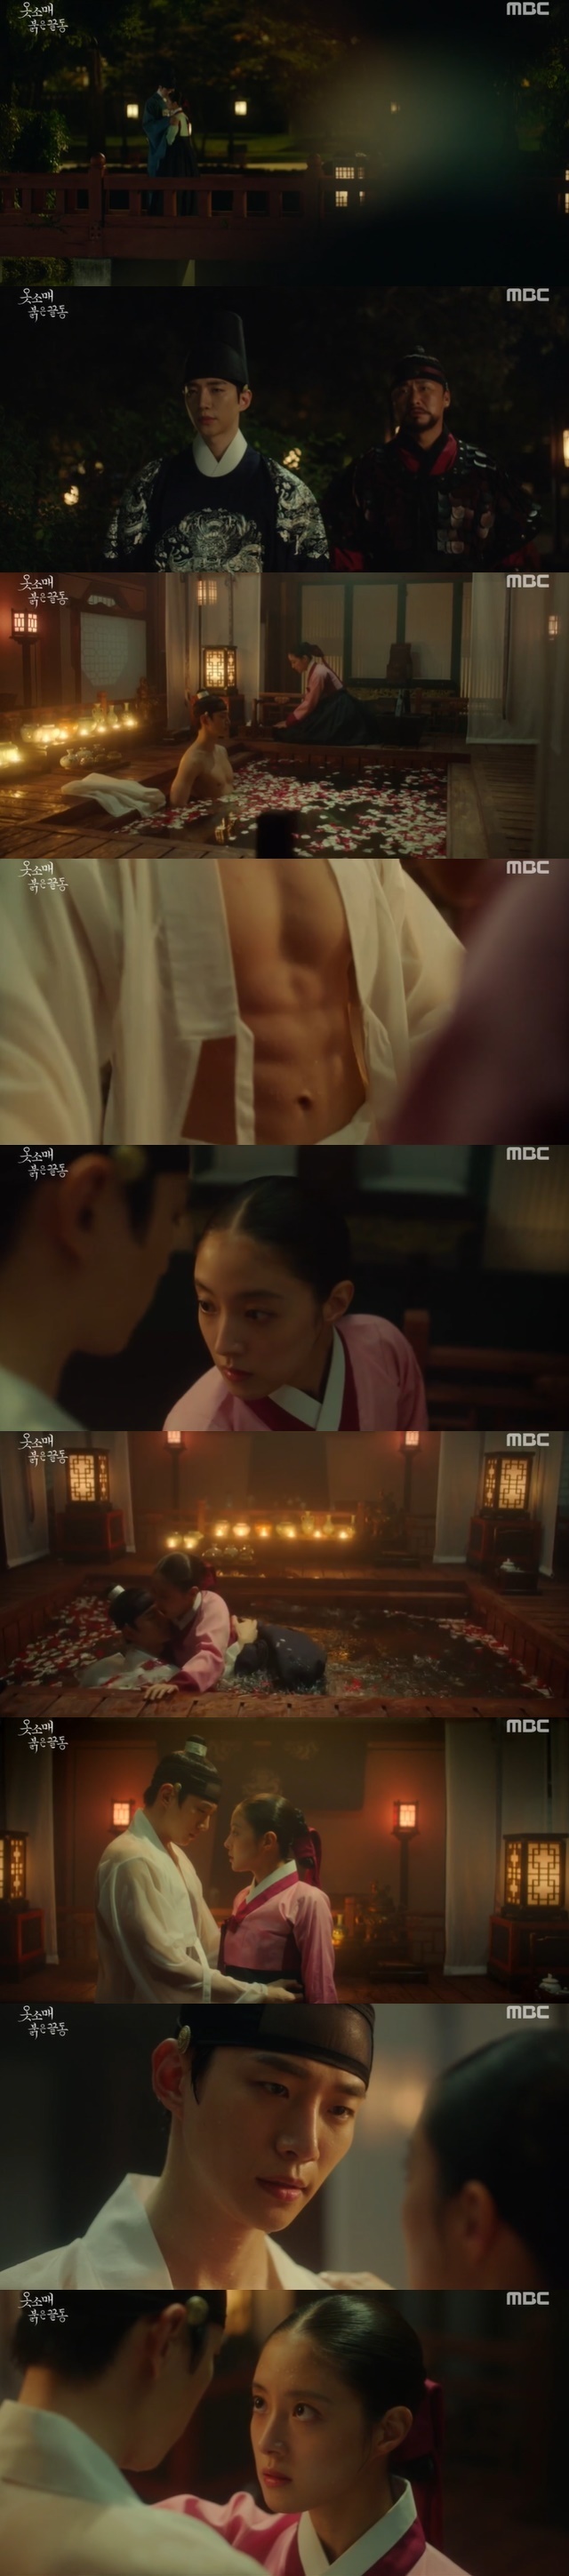 Lee Se-young, who was in the bath, was surprised by Lee Joon-hos naked body and fell into the bath together, and gave a tension full of excitement and tension.In the 6th episode of MBCs gilt drama The Red Sleeve (playplayplay by Jeong Hae-ri / directed by Jeong Ji-in and Song Yeon-hwa), which was broadcast on November 27, the performance of Lee Se-young, who released the gold spirit of Lee Joon-ho by himself, was portrayed.On this day, I found a person who could prove to Yeongjo (Lee Duk-hwa) to solve the acid silver gold spirit.The troubles of the discrete were conveyed to the Dongduk society through the Sungdeok, but everyone could not make a pointed number, and Sungdeokim came up with the answer that only he could do.Sung Duk-im mentioned Kim (Jang Hee-jin) to Lee San.Sung Duk-im said, This is the only thing I can do as a woman. He said, I will see Mama in the middle and ask you to be on the side of the decline.Sung Duk-im, with the help of Hye-bin Hong (Kang Mal-geum), approached Jung-jeon Kim on the pretext of helping the Junggungjeon, which is busy with the work of a man who is a man who is still alive.Kim, who read the approach and intention of this kind of virtue, suggested that he play a mystery game because he was free, tested the wisdom of Sung Duk Lim and at the same time, he was filled with the self of the separated person.Sung Duk-im did not get the correct answer intended by the middle war, but he caught the heart of the middle war with an unthinkable intelligent answer.In addition, the mirror compares the chung of the discrete to the mirror, The mirror shines everything the same.As if the mirror is the same as Mamas emphasis on Goodbye My Princess, Goodbye My Princess also considers Mama.As much as Mama gives goodbye My Princess, Goodbye My Princess will also receive Mama as Hyosung. He said wisely that discrete is a situation that requires the help of the present heavy war, and he will never forget the grace.Jung-jeon Kim made a proposal to Sung Duk-im.If I bring a cause that no one can refute the Seo Hyo-rim, who is arrogant to himself, I will be on the side of Seson as Sung Deok-im wants.Since then, Sung Duk-im has received information from his comrade Bae Gyeong-hee (Ha Yuli), who has a father in charge, that Hwawan Ongju bought the finest silk of the Qing Dynasty to wear it in a pro-Jamrye, and wrote down a plan to press Hwawan Ongju using it.In the sense that he should wear clothes as a silk of Joseon, Kim made clothes with Qing Dynasty silk, and boasted to his wife and wife of the inside and outside, and slapped and punished Hwawan Ongju in front of him.And this was a great cause that even Yeongjo recognized that Yongju did what he did. Jungjeon Kim was on the side of the separation at the same time as Yeongjos recognition, and eventually the gold spirit of the separation was released.With this work, the trust and love for the Sungdeokim of the separated people grew, and the check of Hongdeokro (Kanghoon) also doubled.So Hong Duk-ro harassed and threatened Sungdeok late at night, and sent a twisted check that I will be deprived of the position of the subordinate to my anti-sister.On the other hand, I did not know the contents of the acid silver conversation that watched this from afar, and I just grew jealous.Iacid silver has become much more hysterical with jealousy of Hong Duk-ro and Sung Duk-im.Even the middle war that I like is a situation where I keep my work next to myself without returning the castle to Goodbye My Princess.So, the Sanggung and Nine, which were difficult to match the planting of the separated, prepared a tang with medicines to calm down the turbulence and reached the Bath of the separated.At this time, the only one who was not well was the dizziness of the upper palace where the bat of the discrete was available.Nine, who had to listen to the Bath of the other Nine, but who was afraid of the discrete, stopped by Goodbye My Princess when there was no one else.Nine forced Sungdeok into the Bath market of discrete.I closed my eyes with my top and said, I am tired of the acid silver in the bath. I was surprised to see that the answering voice was a virtue.Iacid silver I picked up the top that was taken off in a hurry while turning around.After that, I saw the acid silver virtue that was again served by Bath, and then I remembered the memories of Last Nights Curry, Tomorrows Bread, and I met with the Last Nights Curry, Tomorrows Bread and the librarian alone?I cant believe that the co-author is so close to you. What if you see someone else? In the meantime, I was the one who was harassed by Sungdeok, but when I asked that I was the only one who was a tree, It is not my business to other courtesans.I only care about my person, he said.